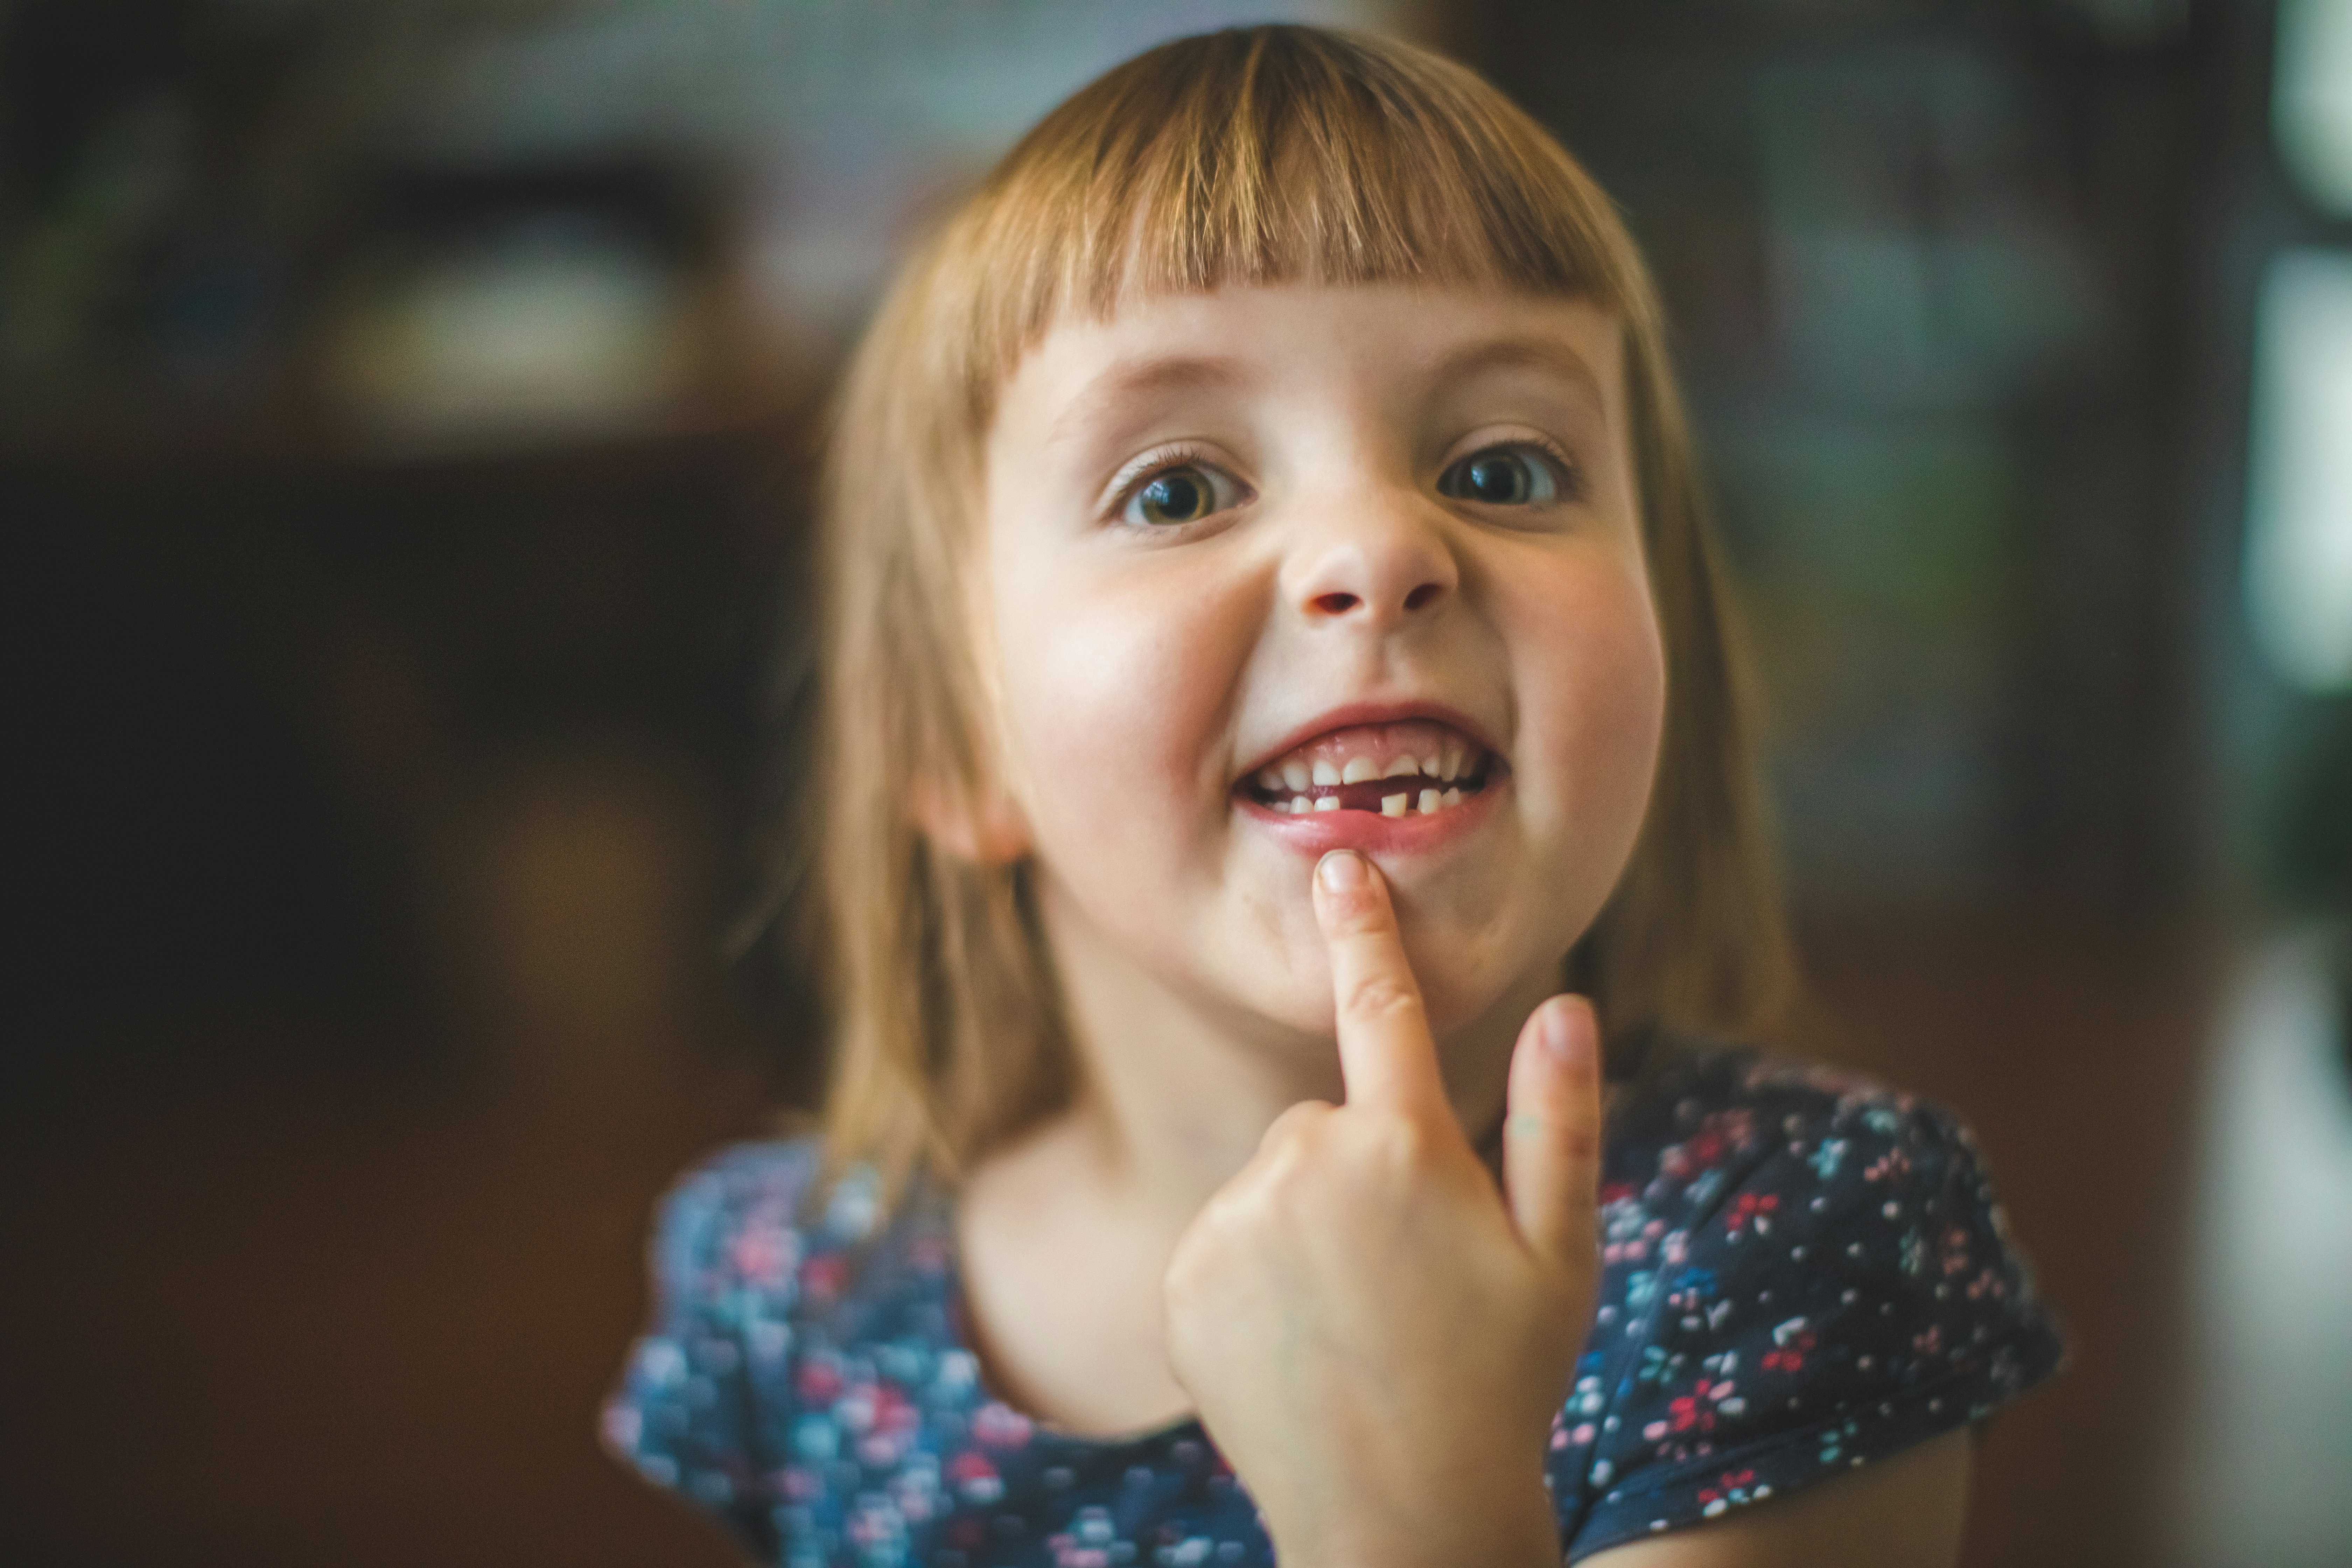 Are Tooth Fairies Real? How to Talk to Kids About It